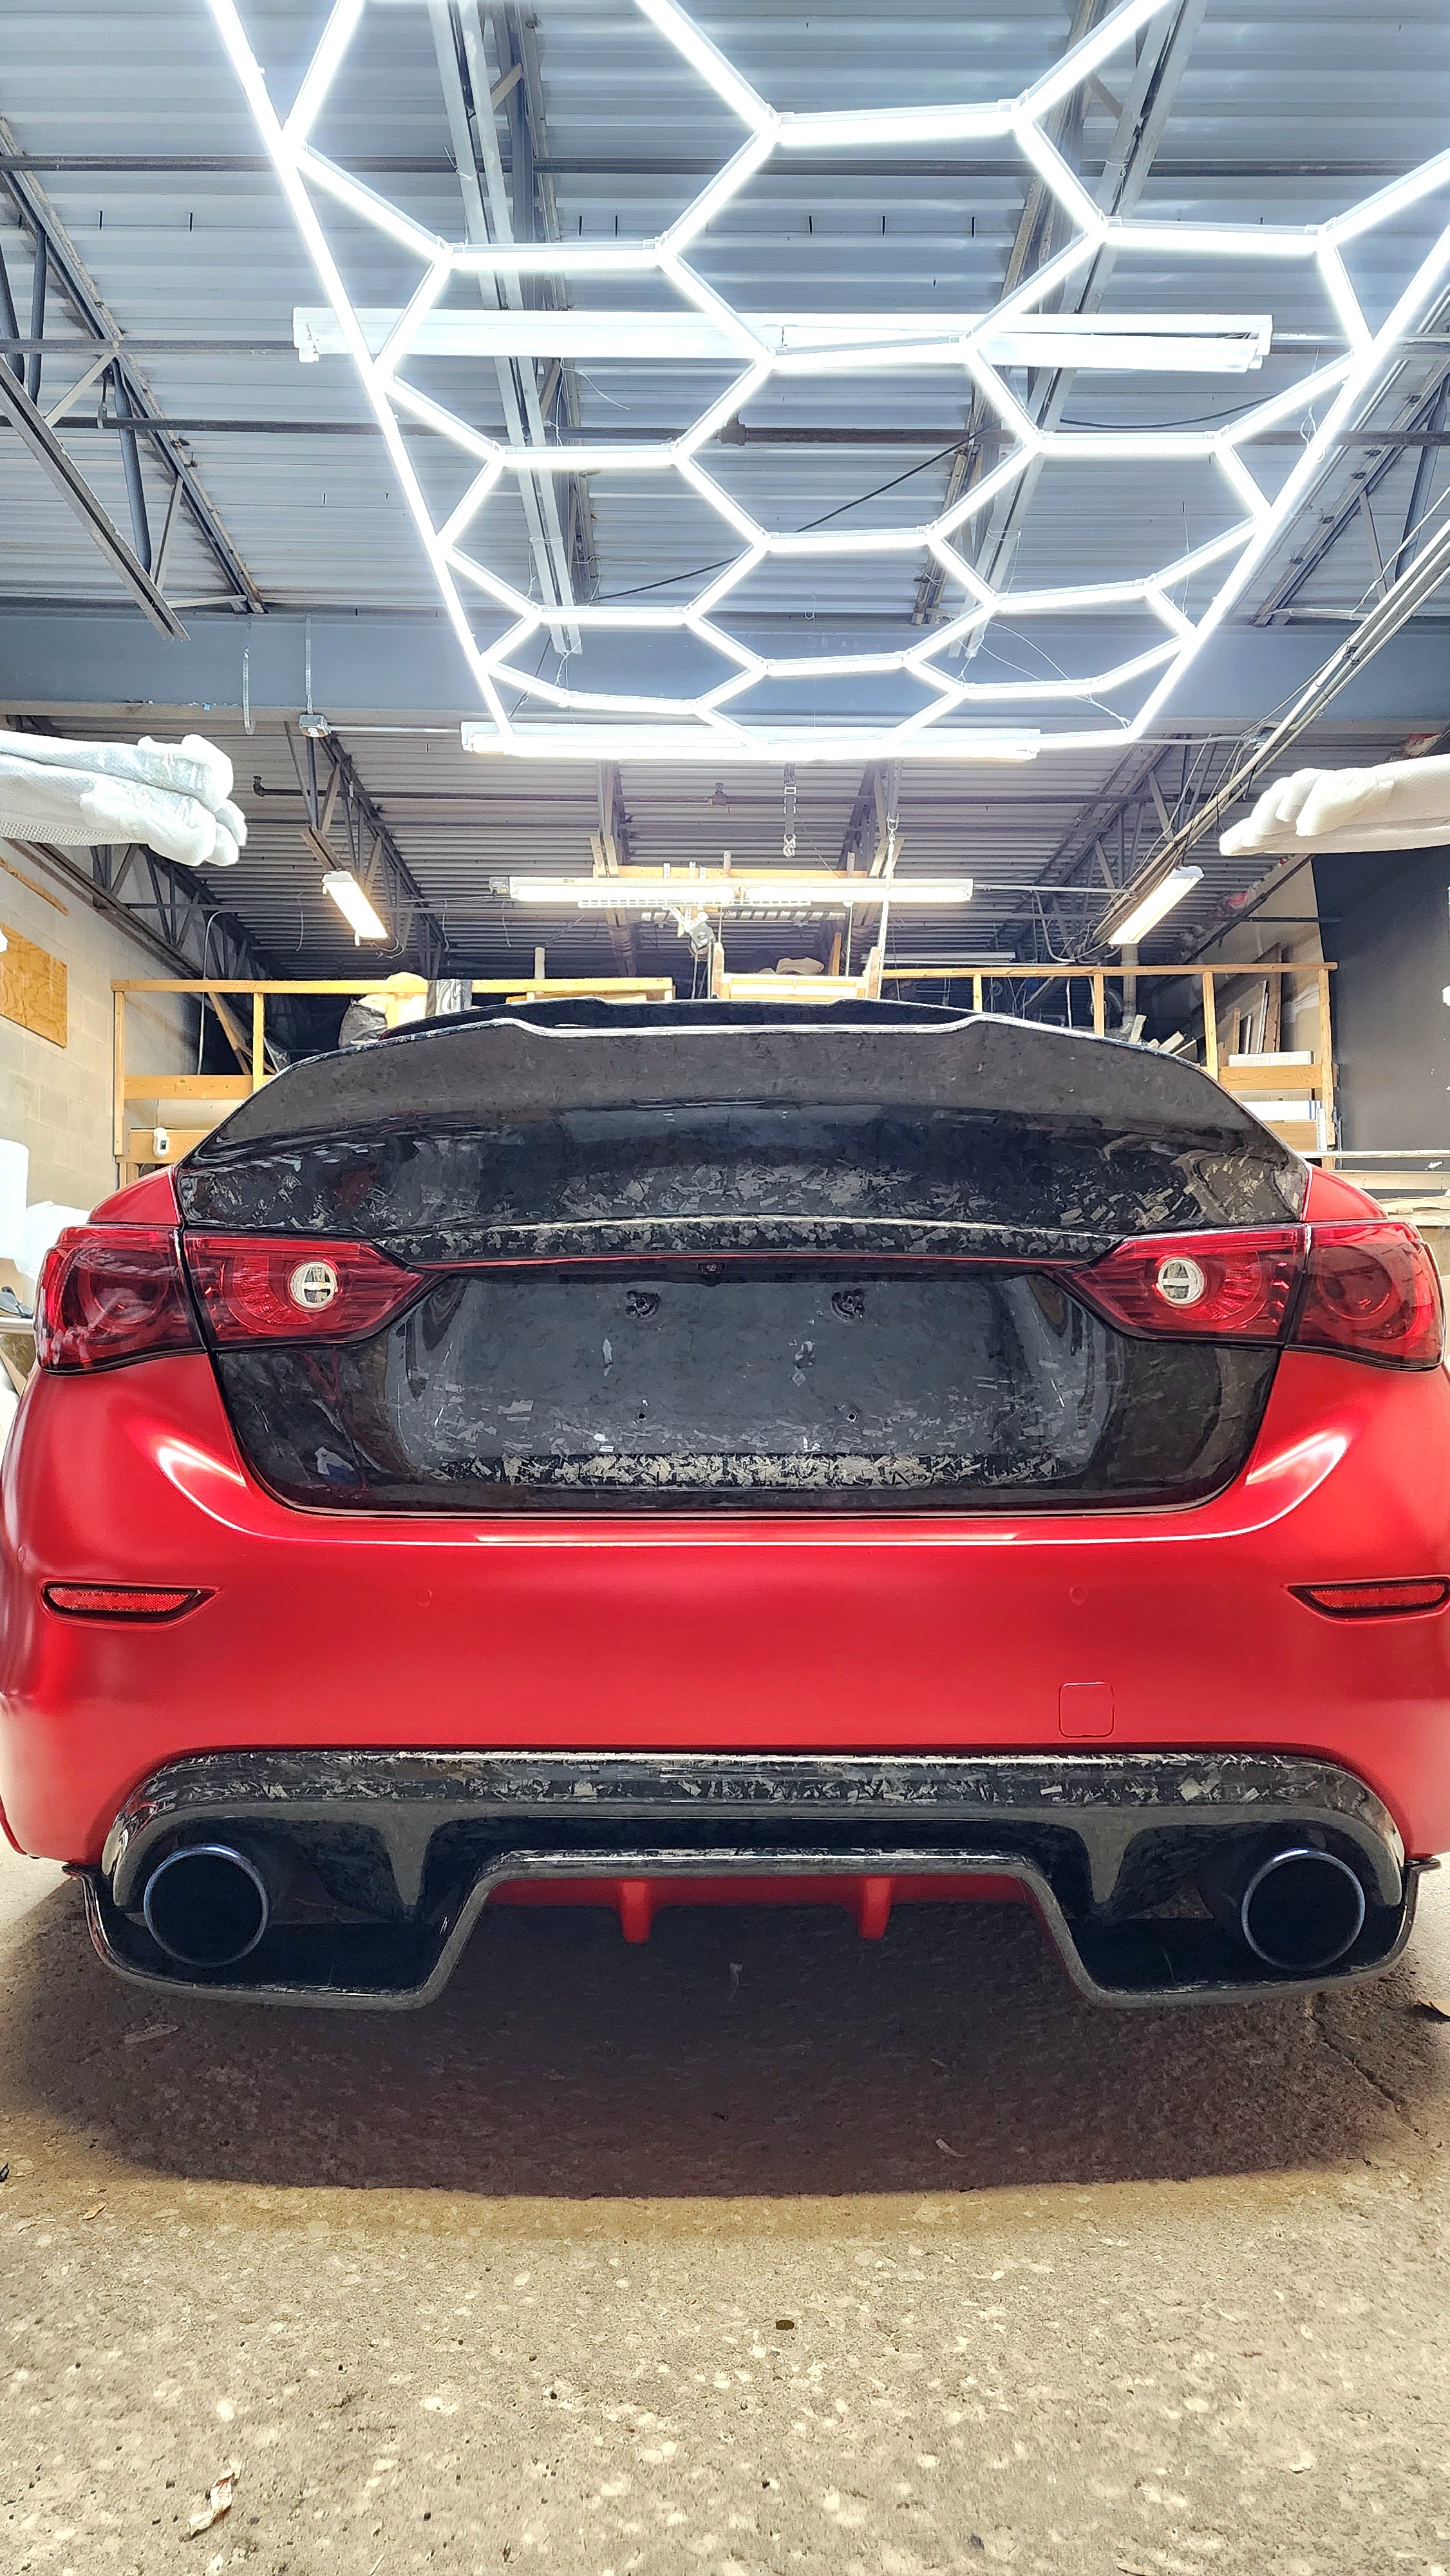 JCF's Carbon Fiber Trunk on Q50, pre-drilled holes for a near OEM fitment